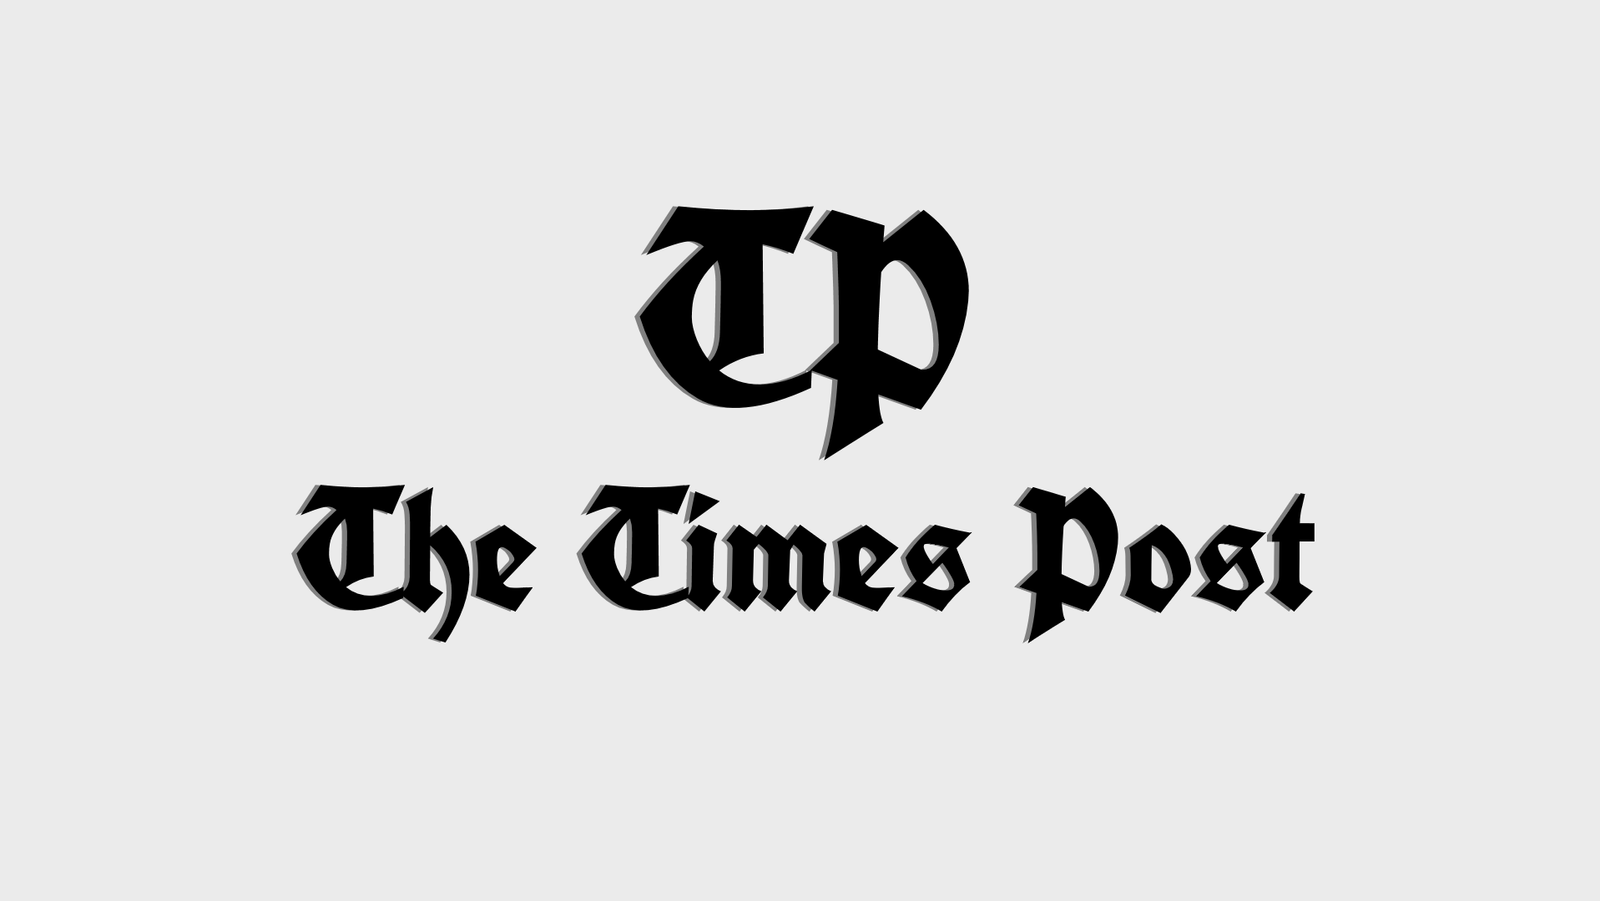 Introducing The Times Post: Reporting Based On Facts